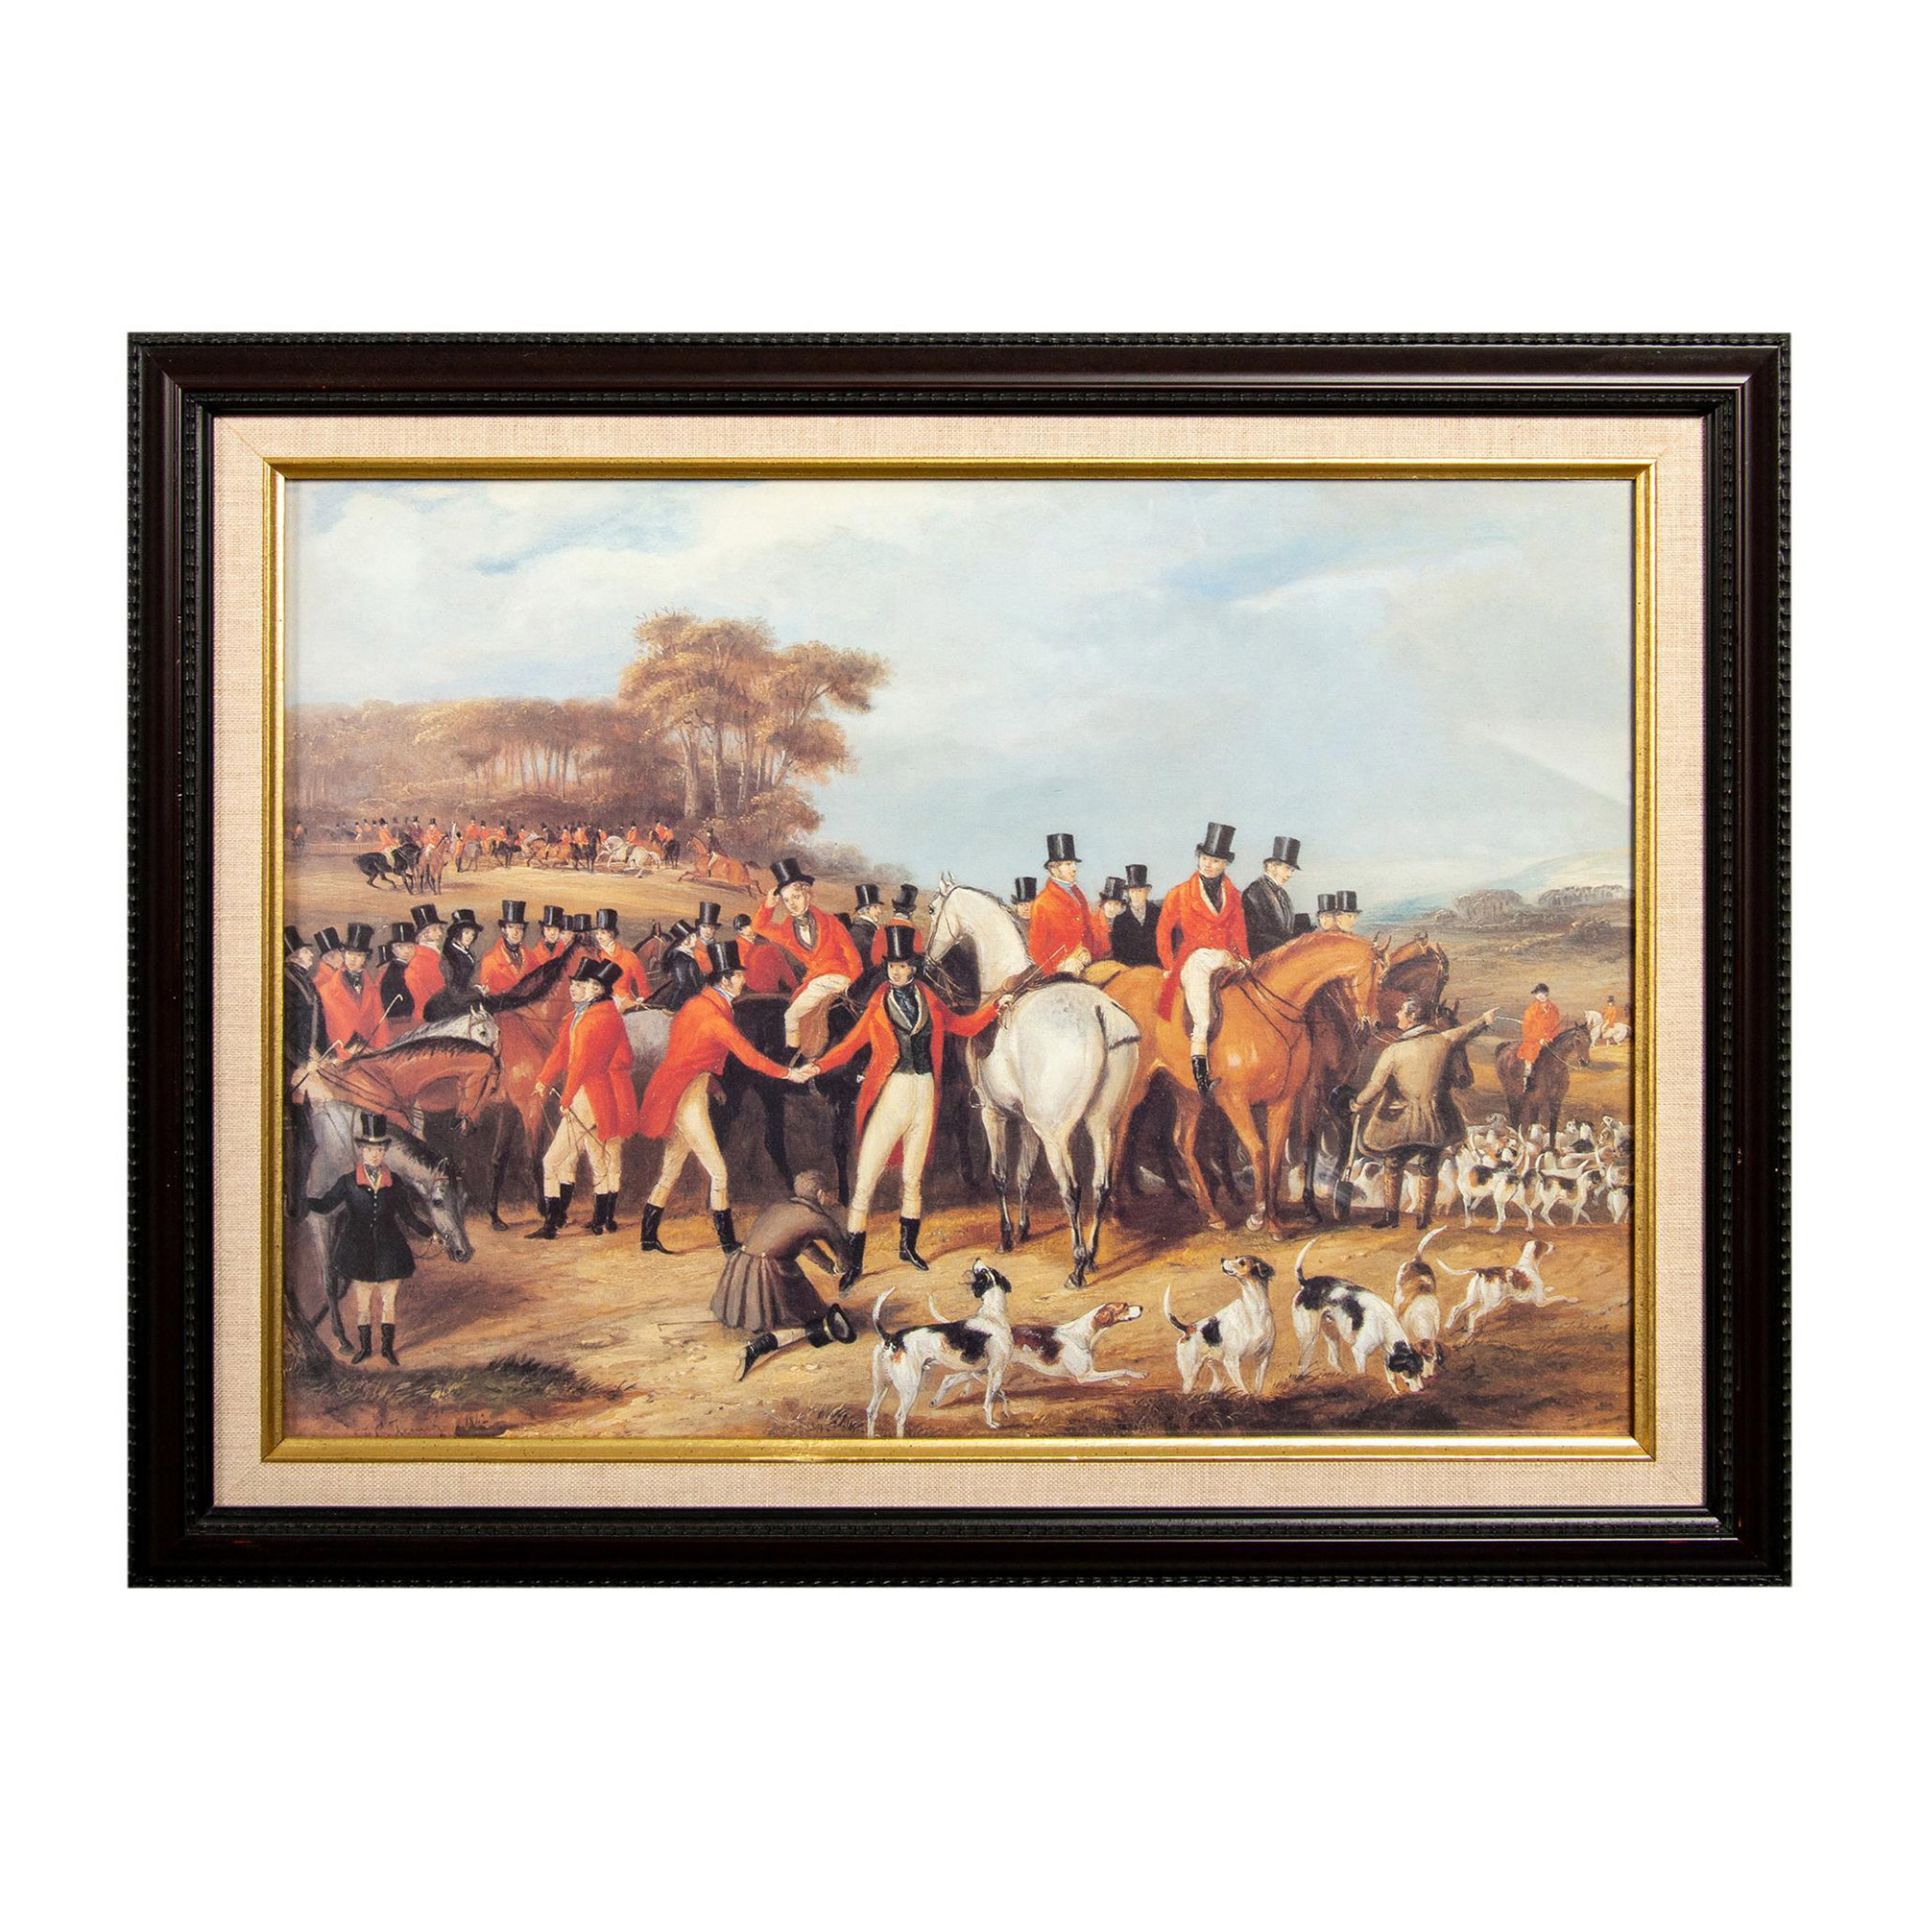 2pc Framed Equestrian Stag Hunting Prints - Image 6 of 9